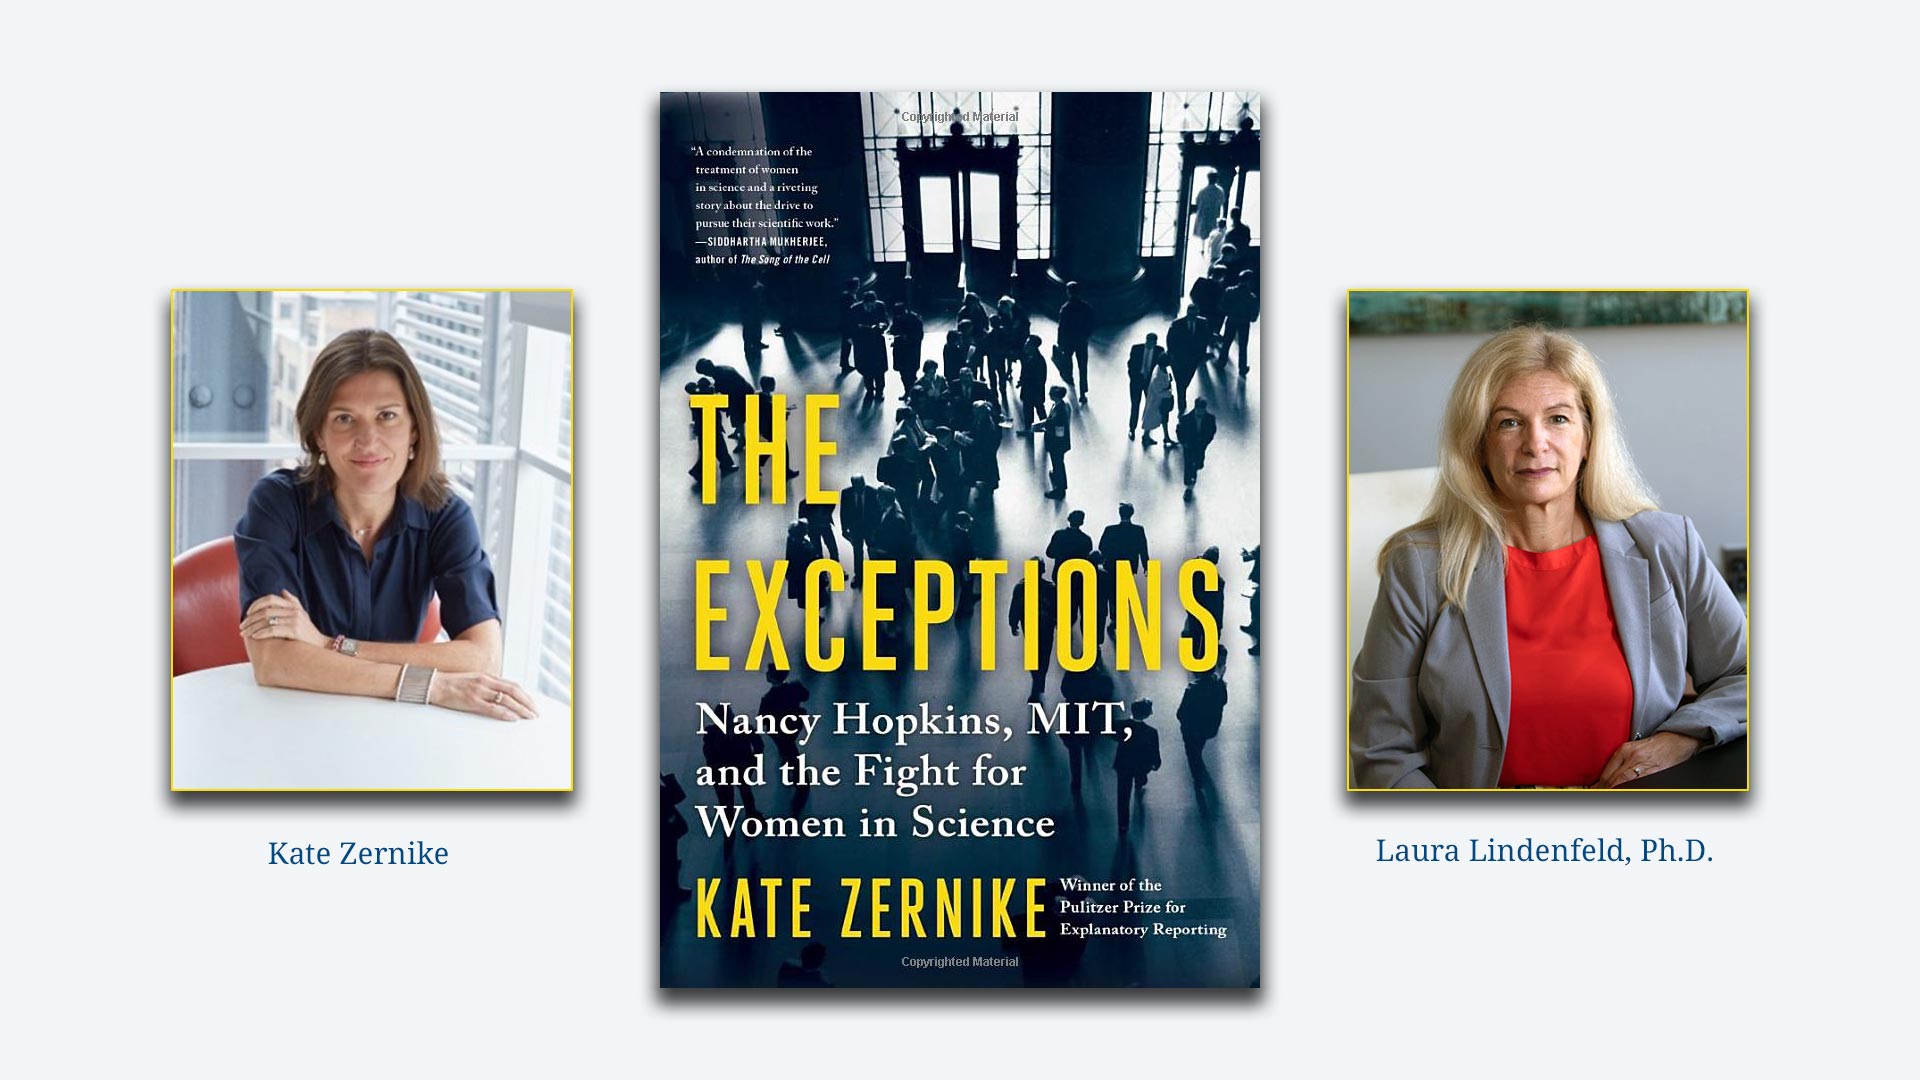 image of Kate Zernike, Laura Lindenfeld, and The Exceptions book cover